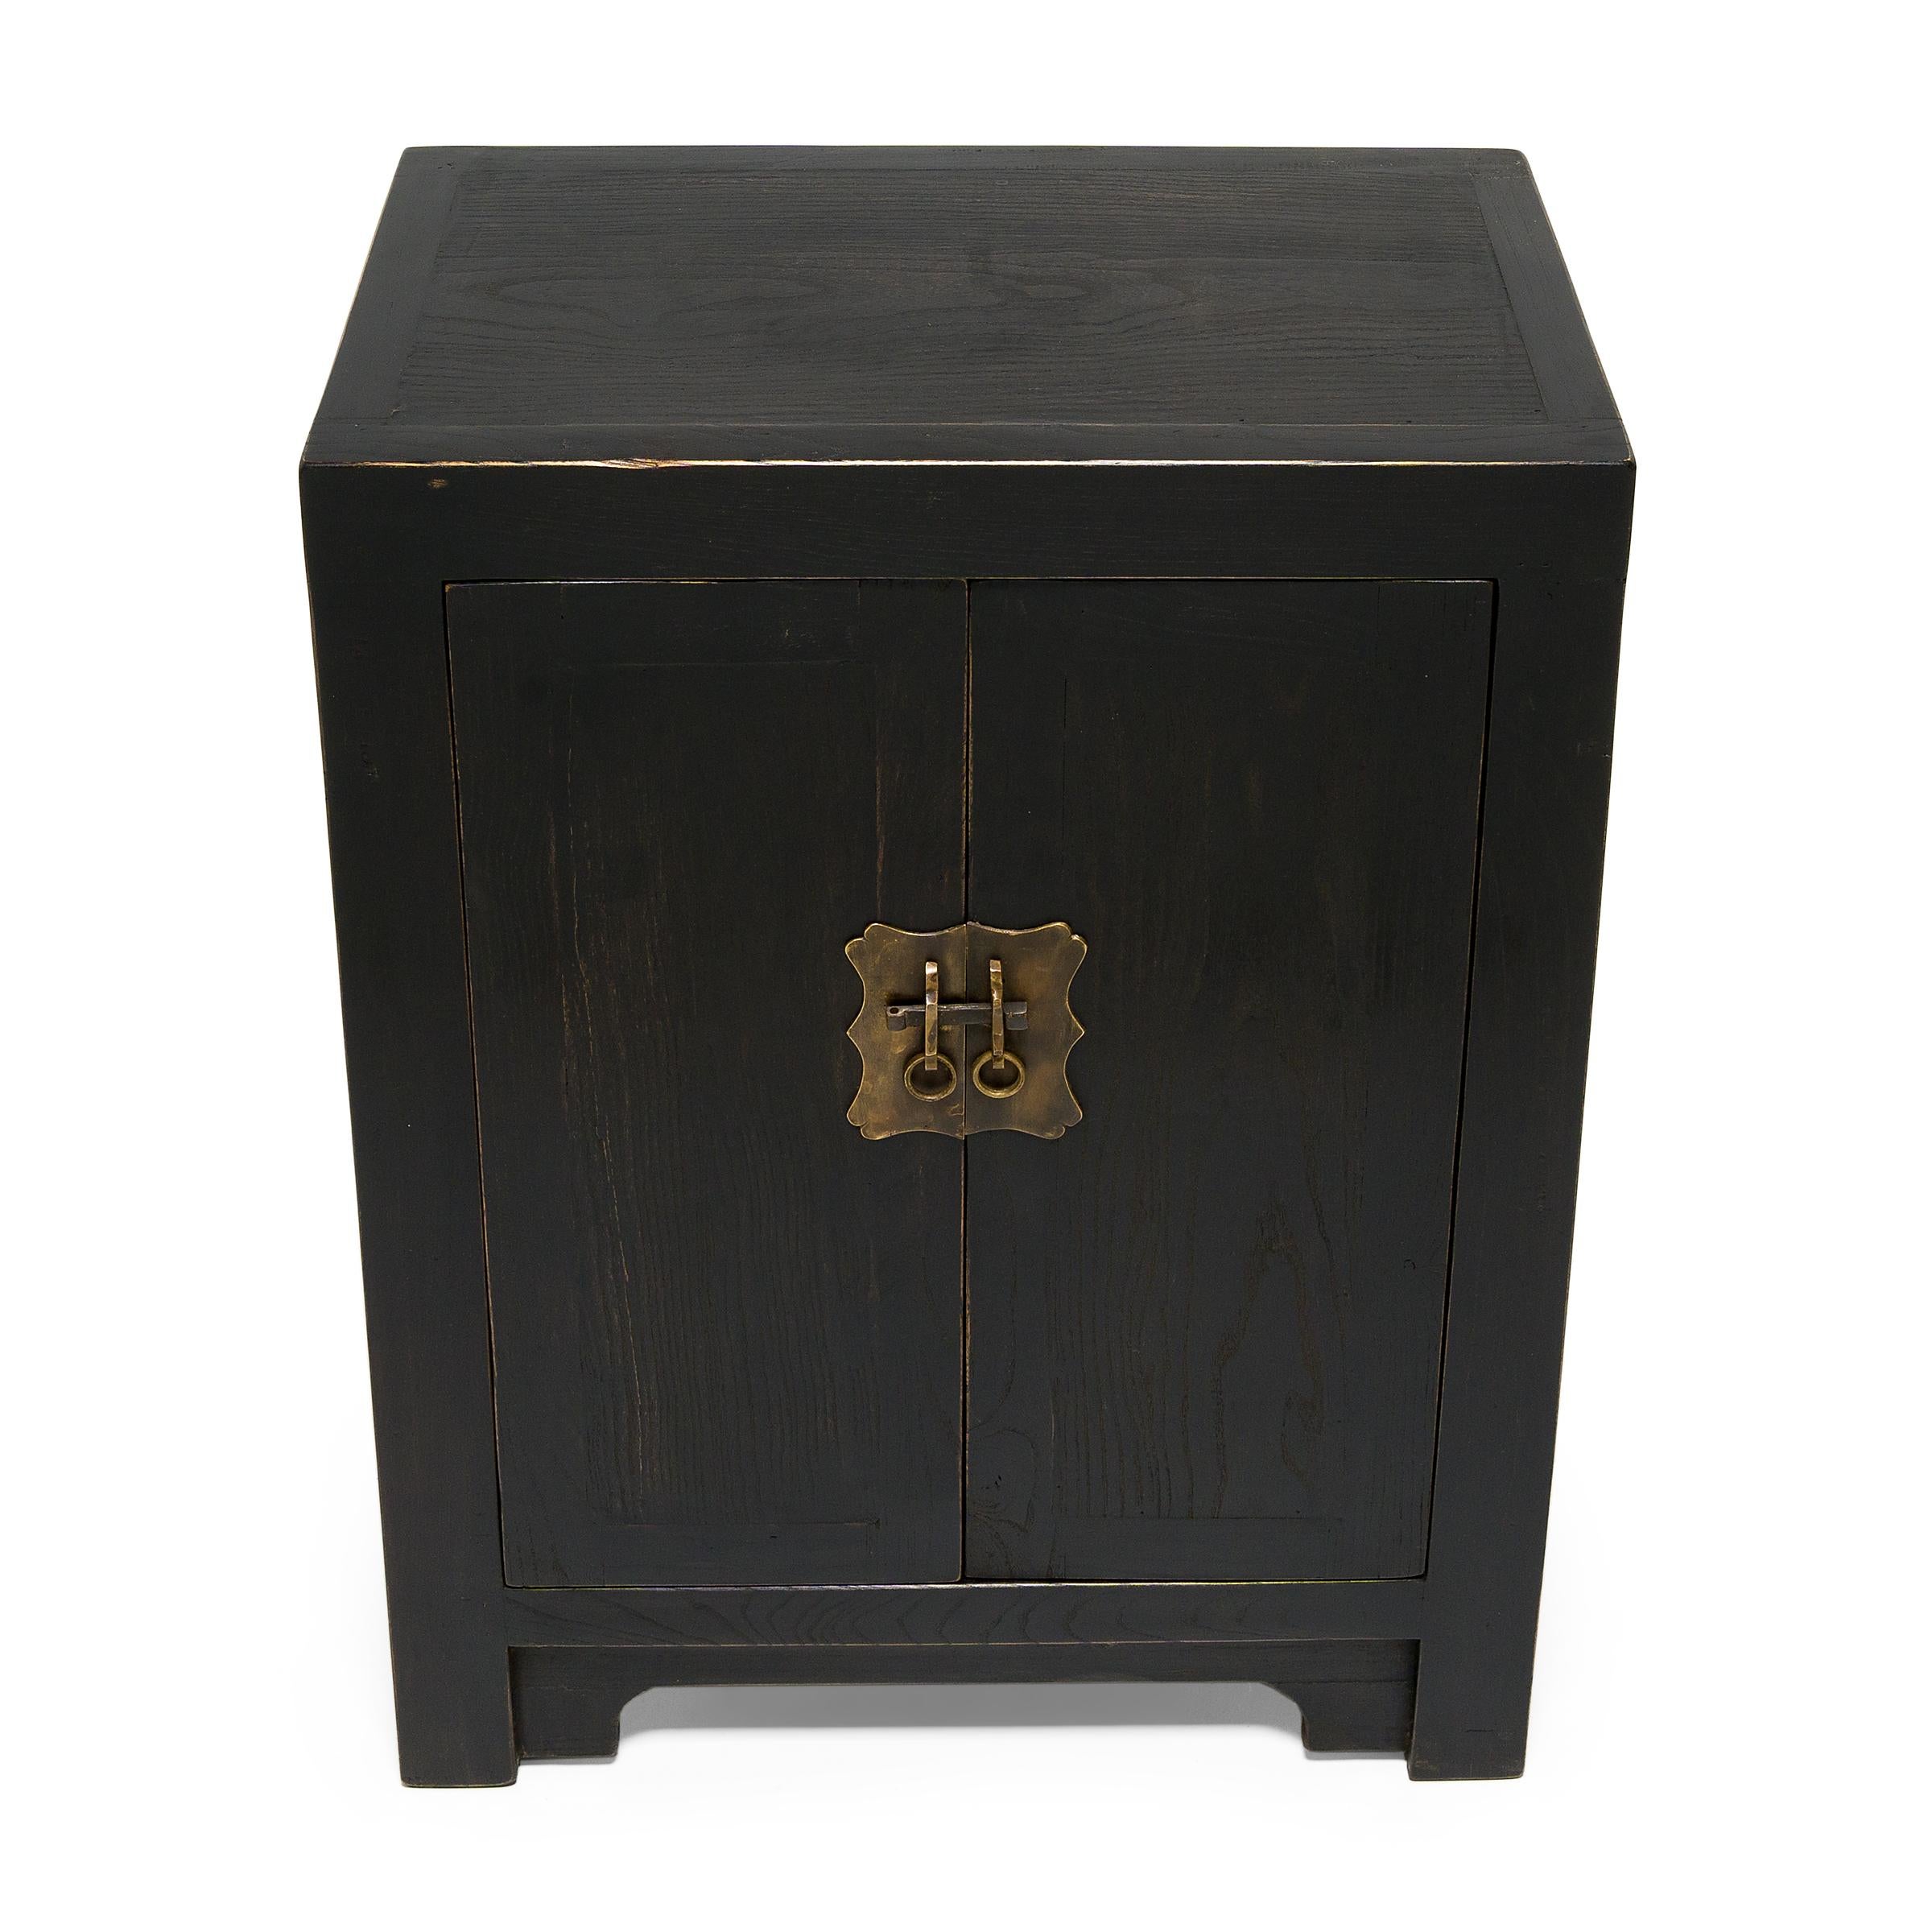 Contemporary Chinese Square Corner Locking Chest For Sale